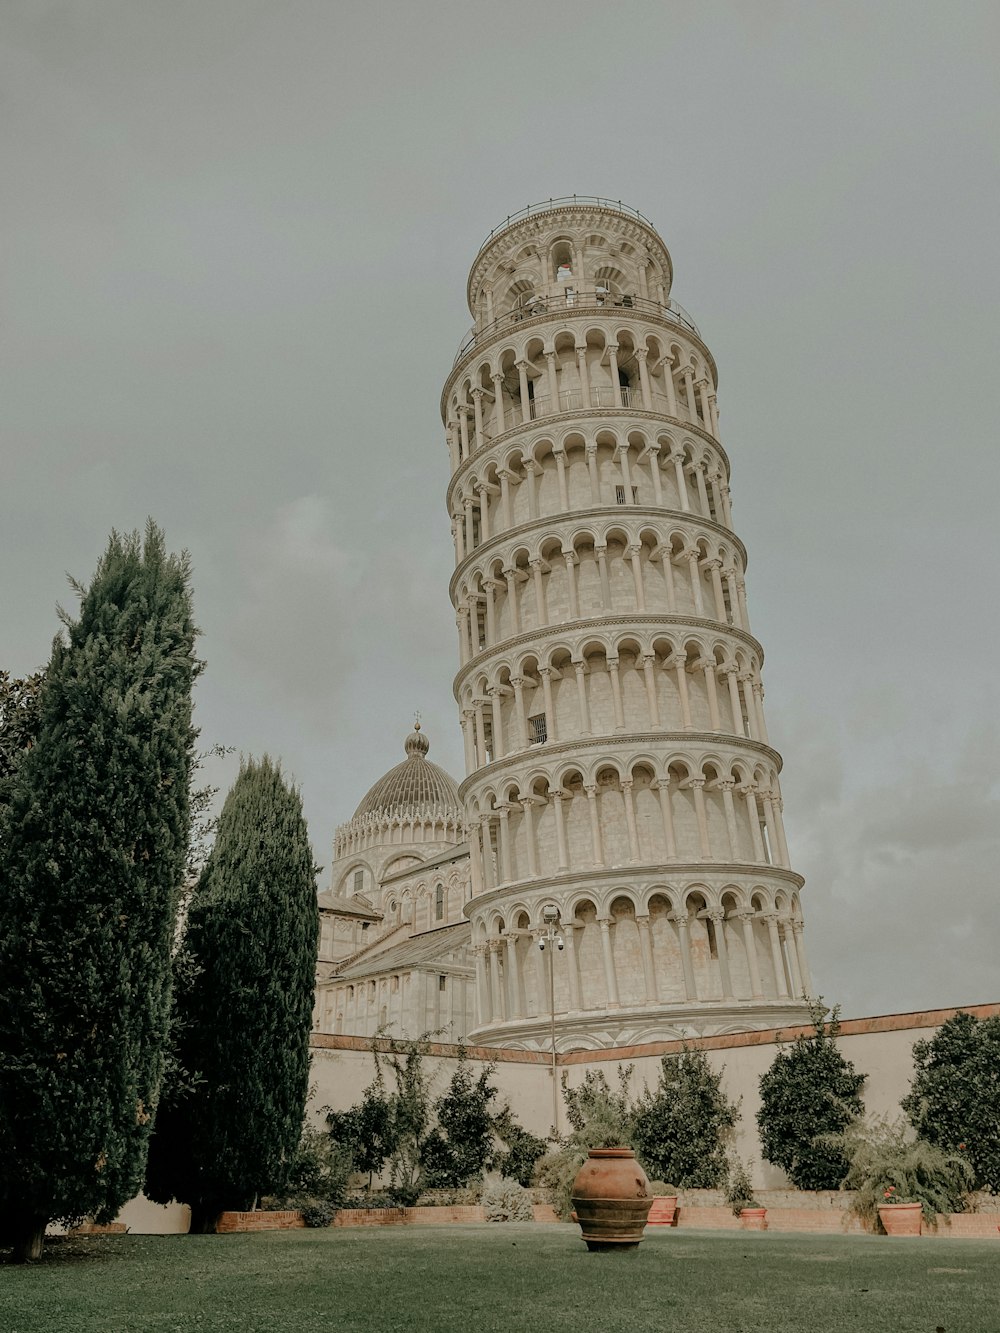 a tall white tower with Leaning Tower of Pisa in the background